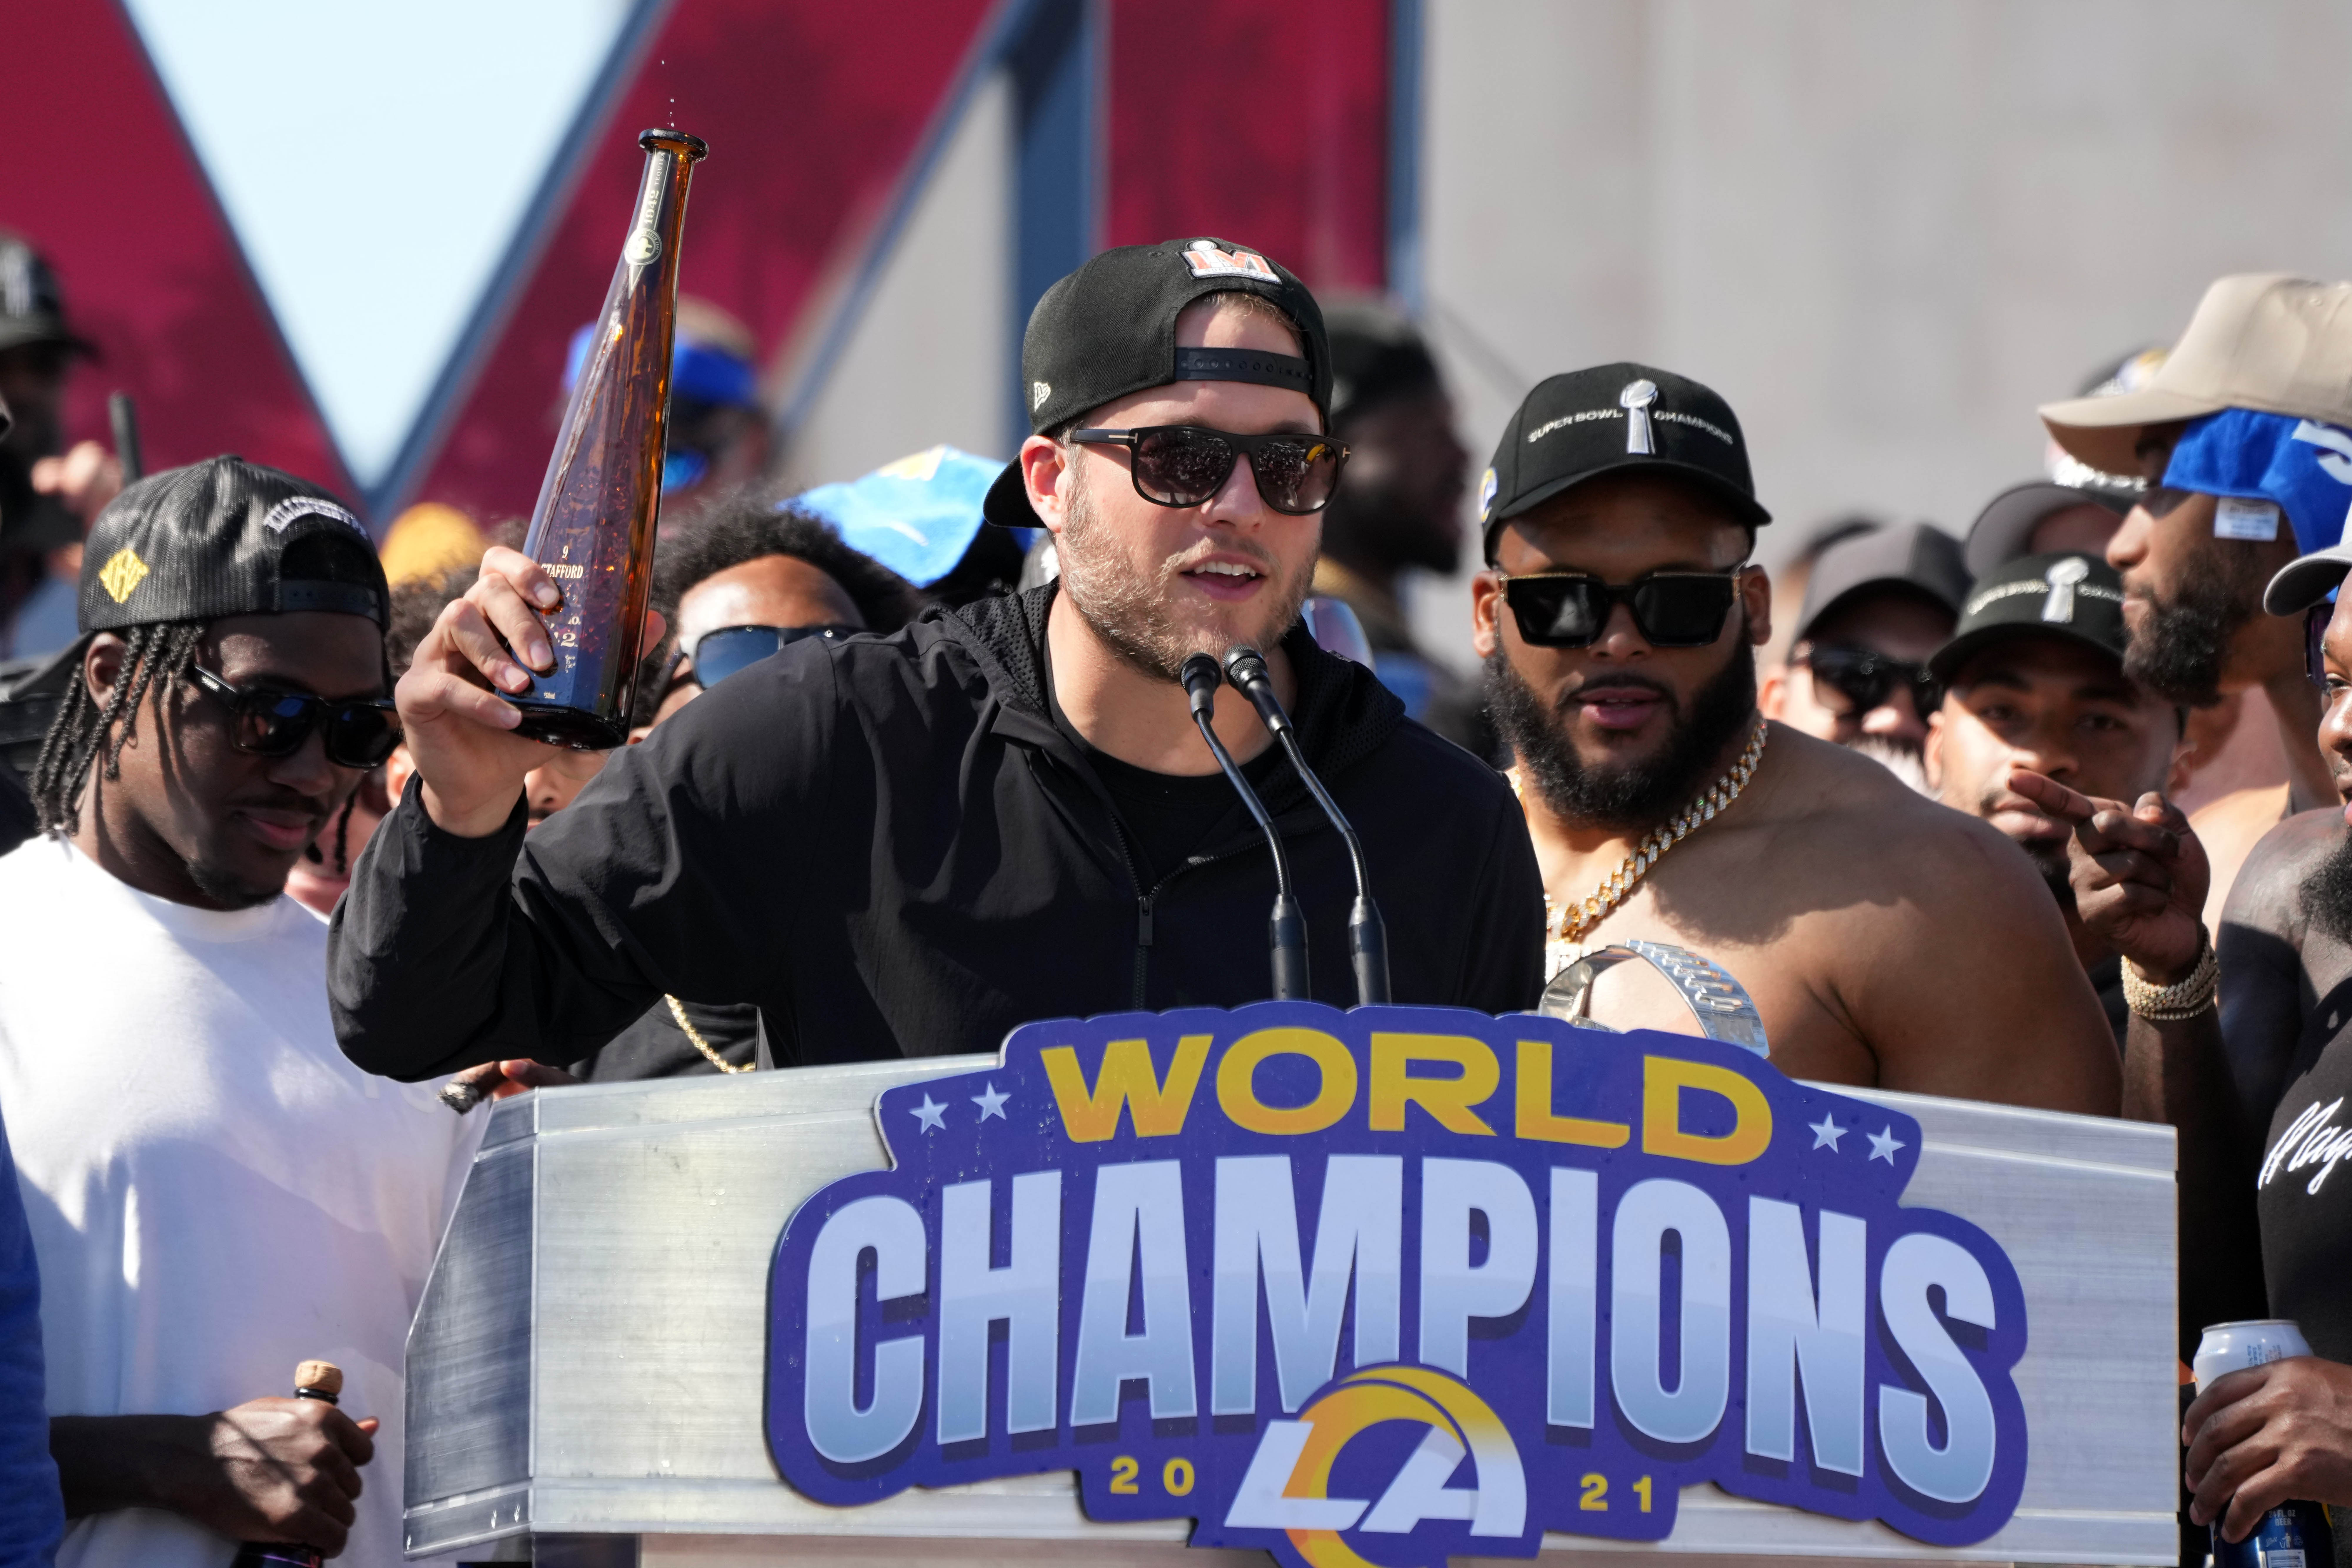 Matthew Stafford discusses reaction to photographer’s fall at Rams parade